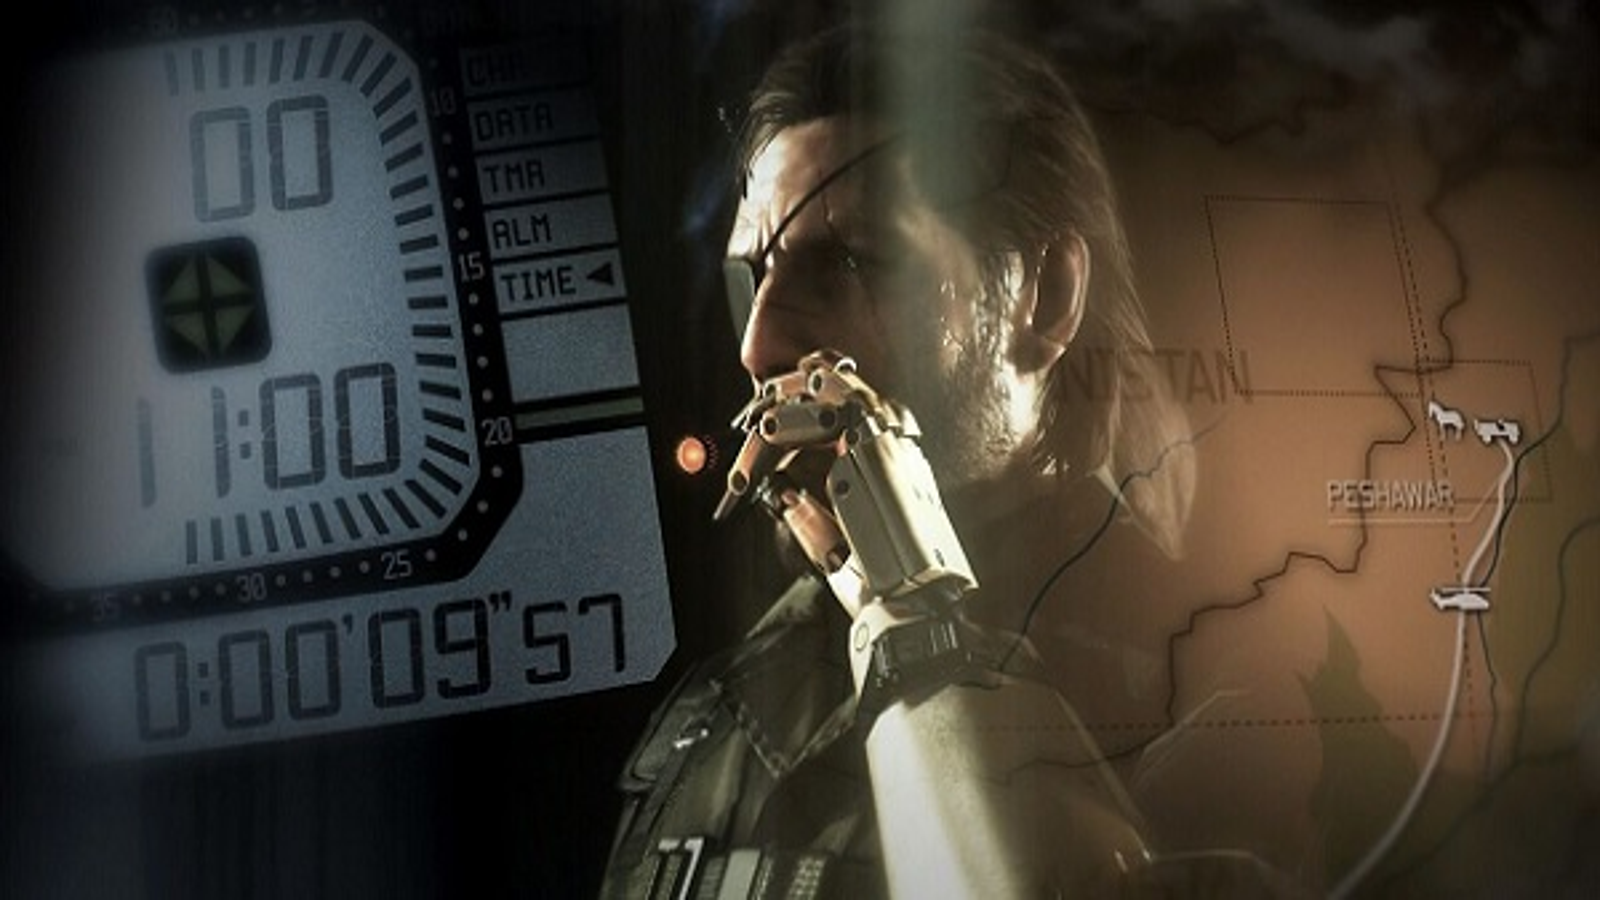 Metal Gear Solid is, once again, the video game of the moment